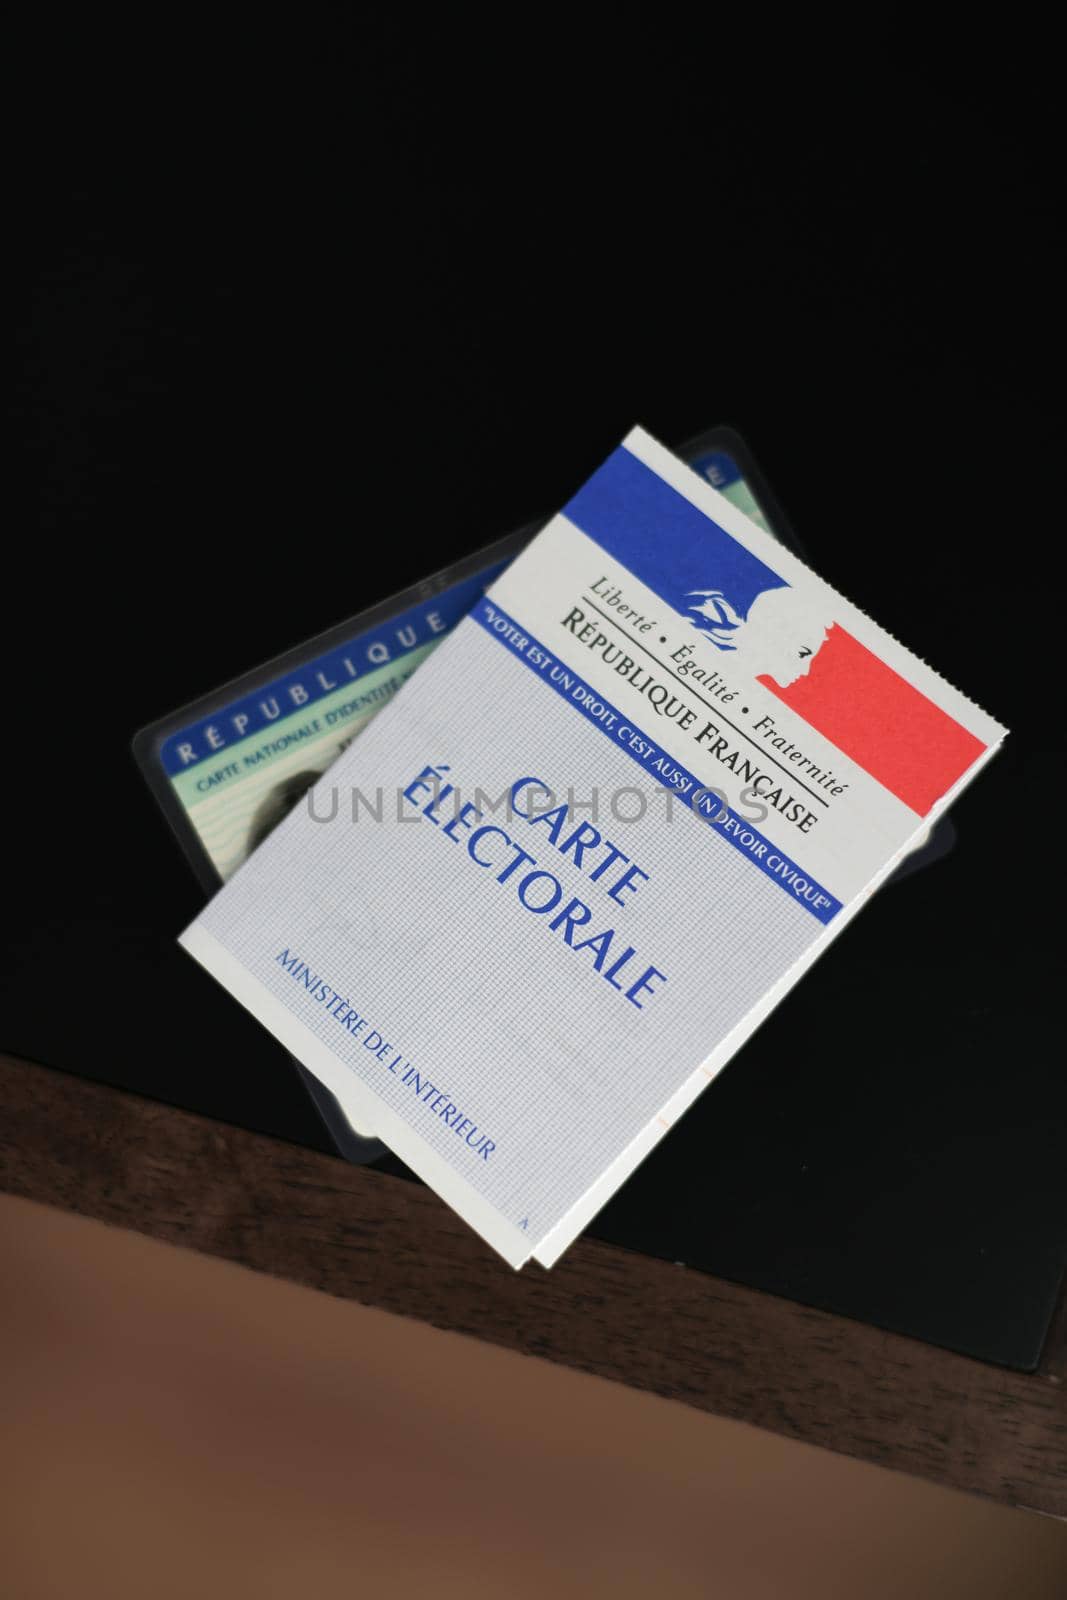 PARIS, FRANCE - MARCH 09, 2020: Hand holds a french electoral card and an identification card for voting by Godi